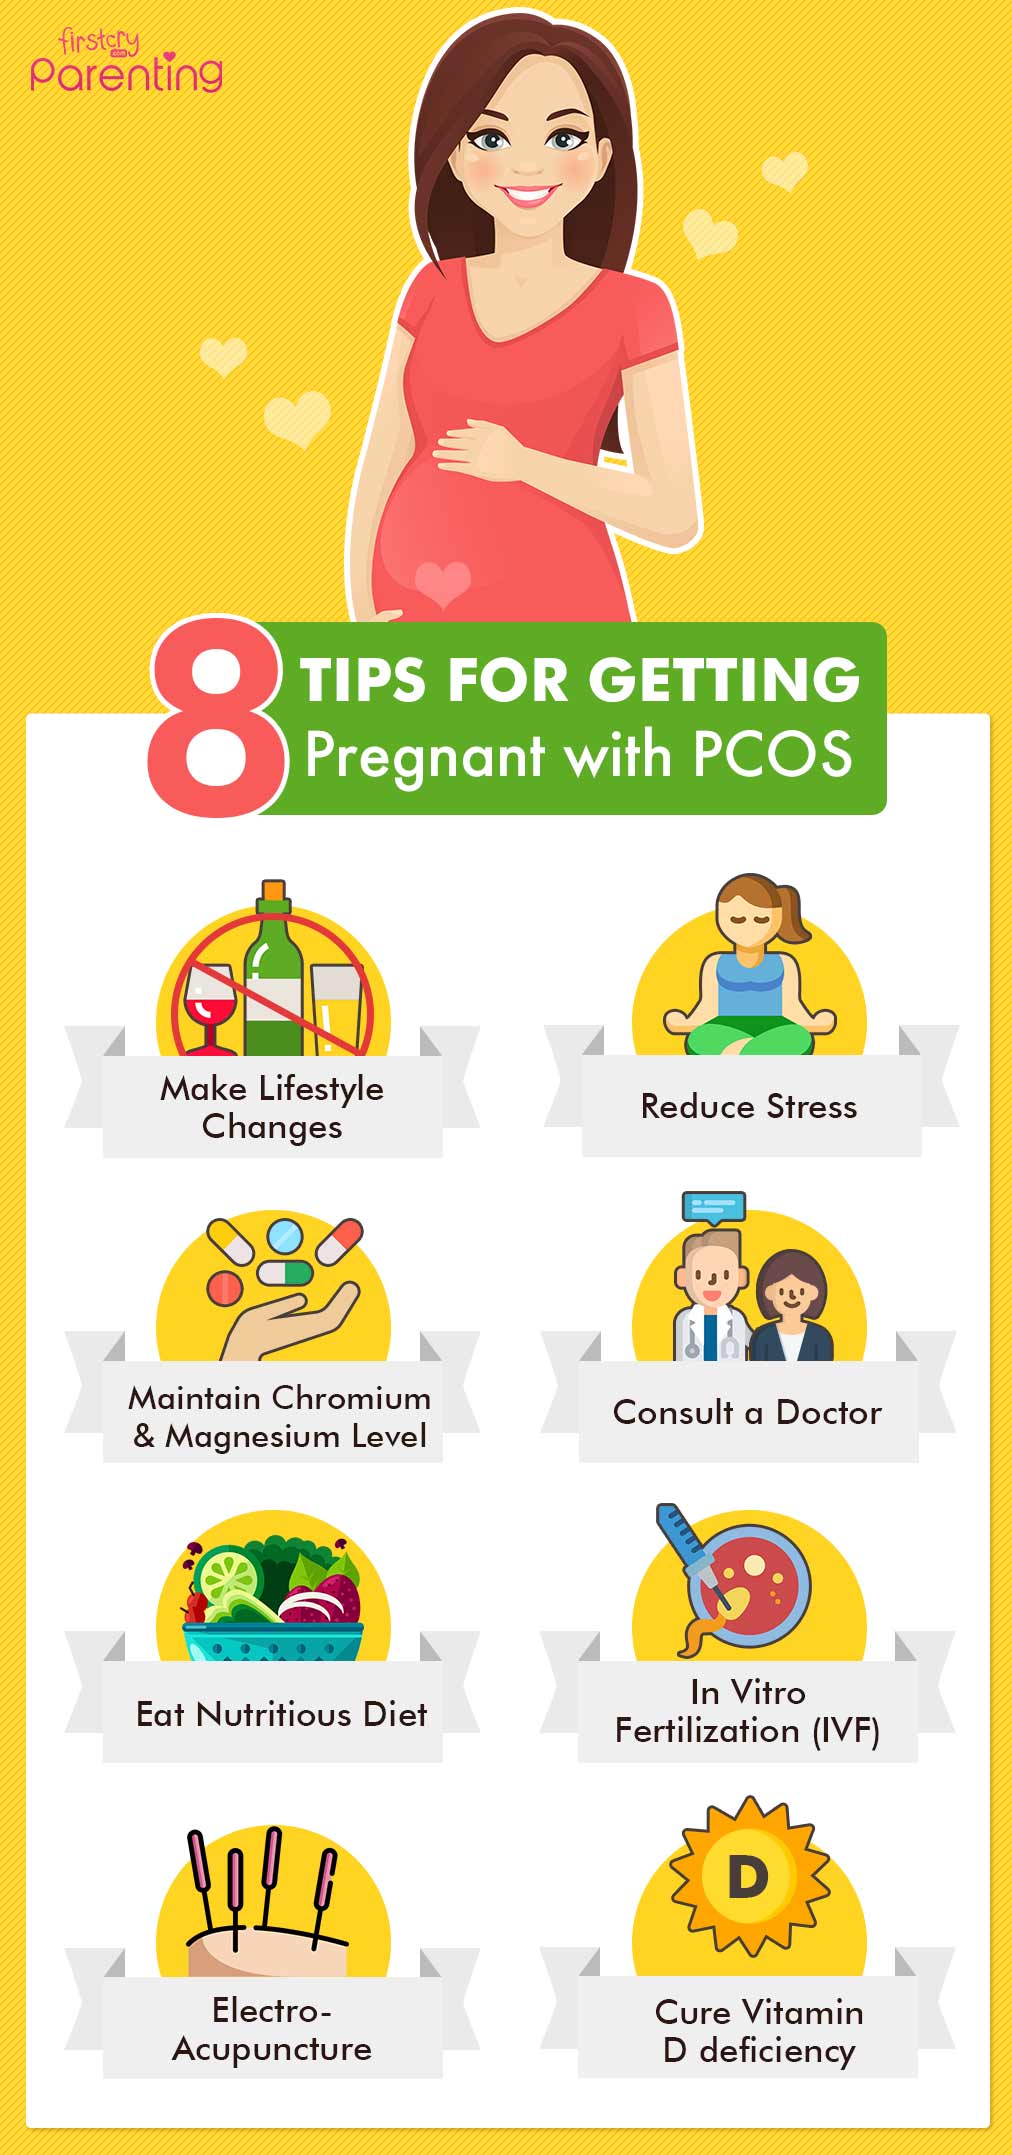 8 Tips for Getting Pregnant with PCOS